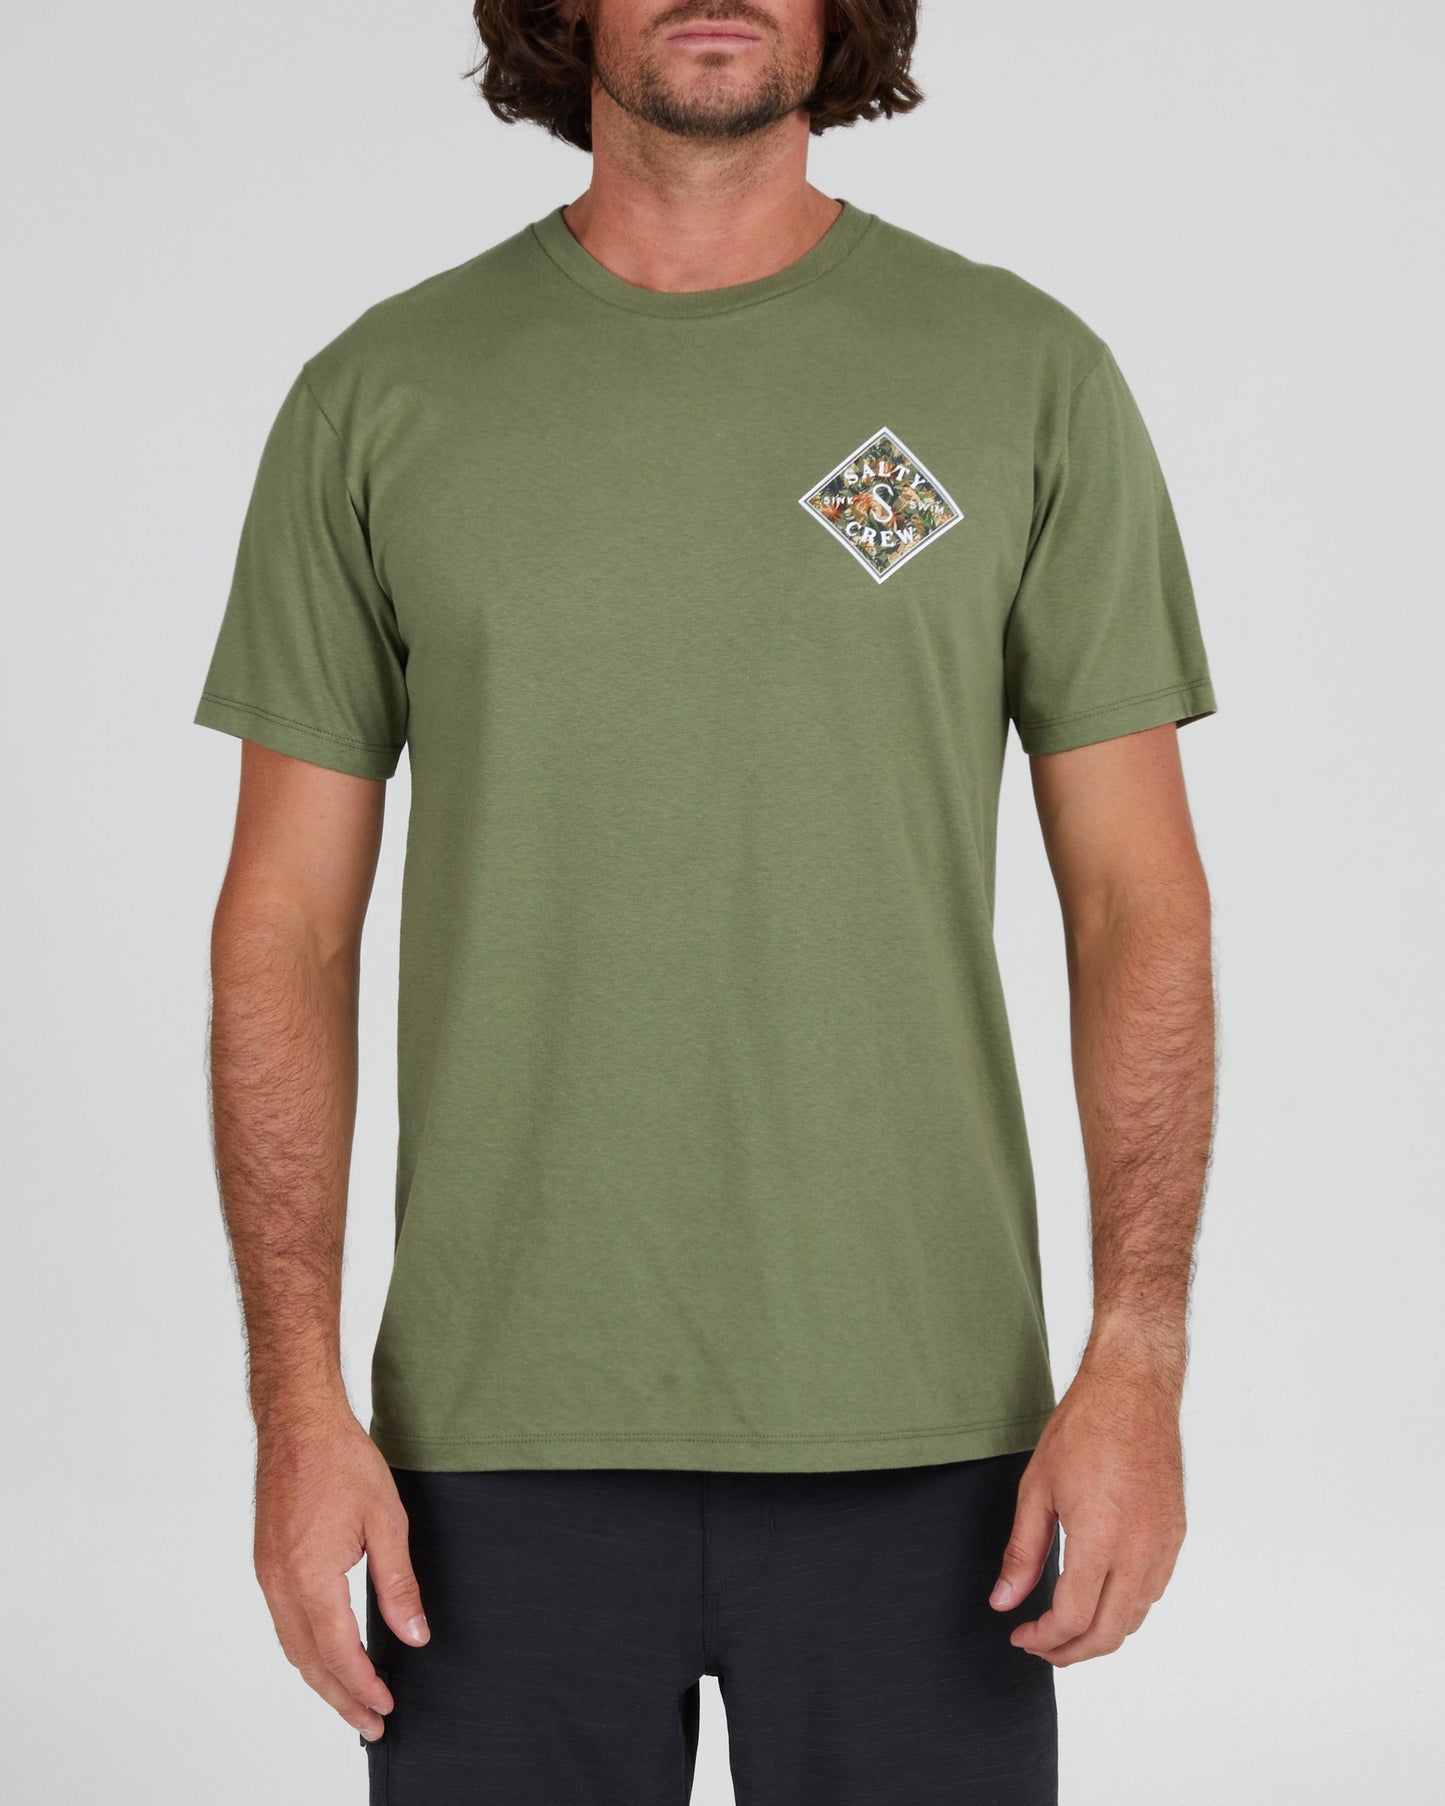 front view of Tippet Shores Sage Green S/S Premium Tee